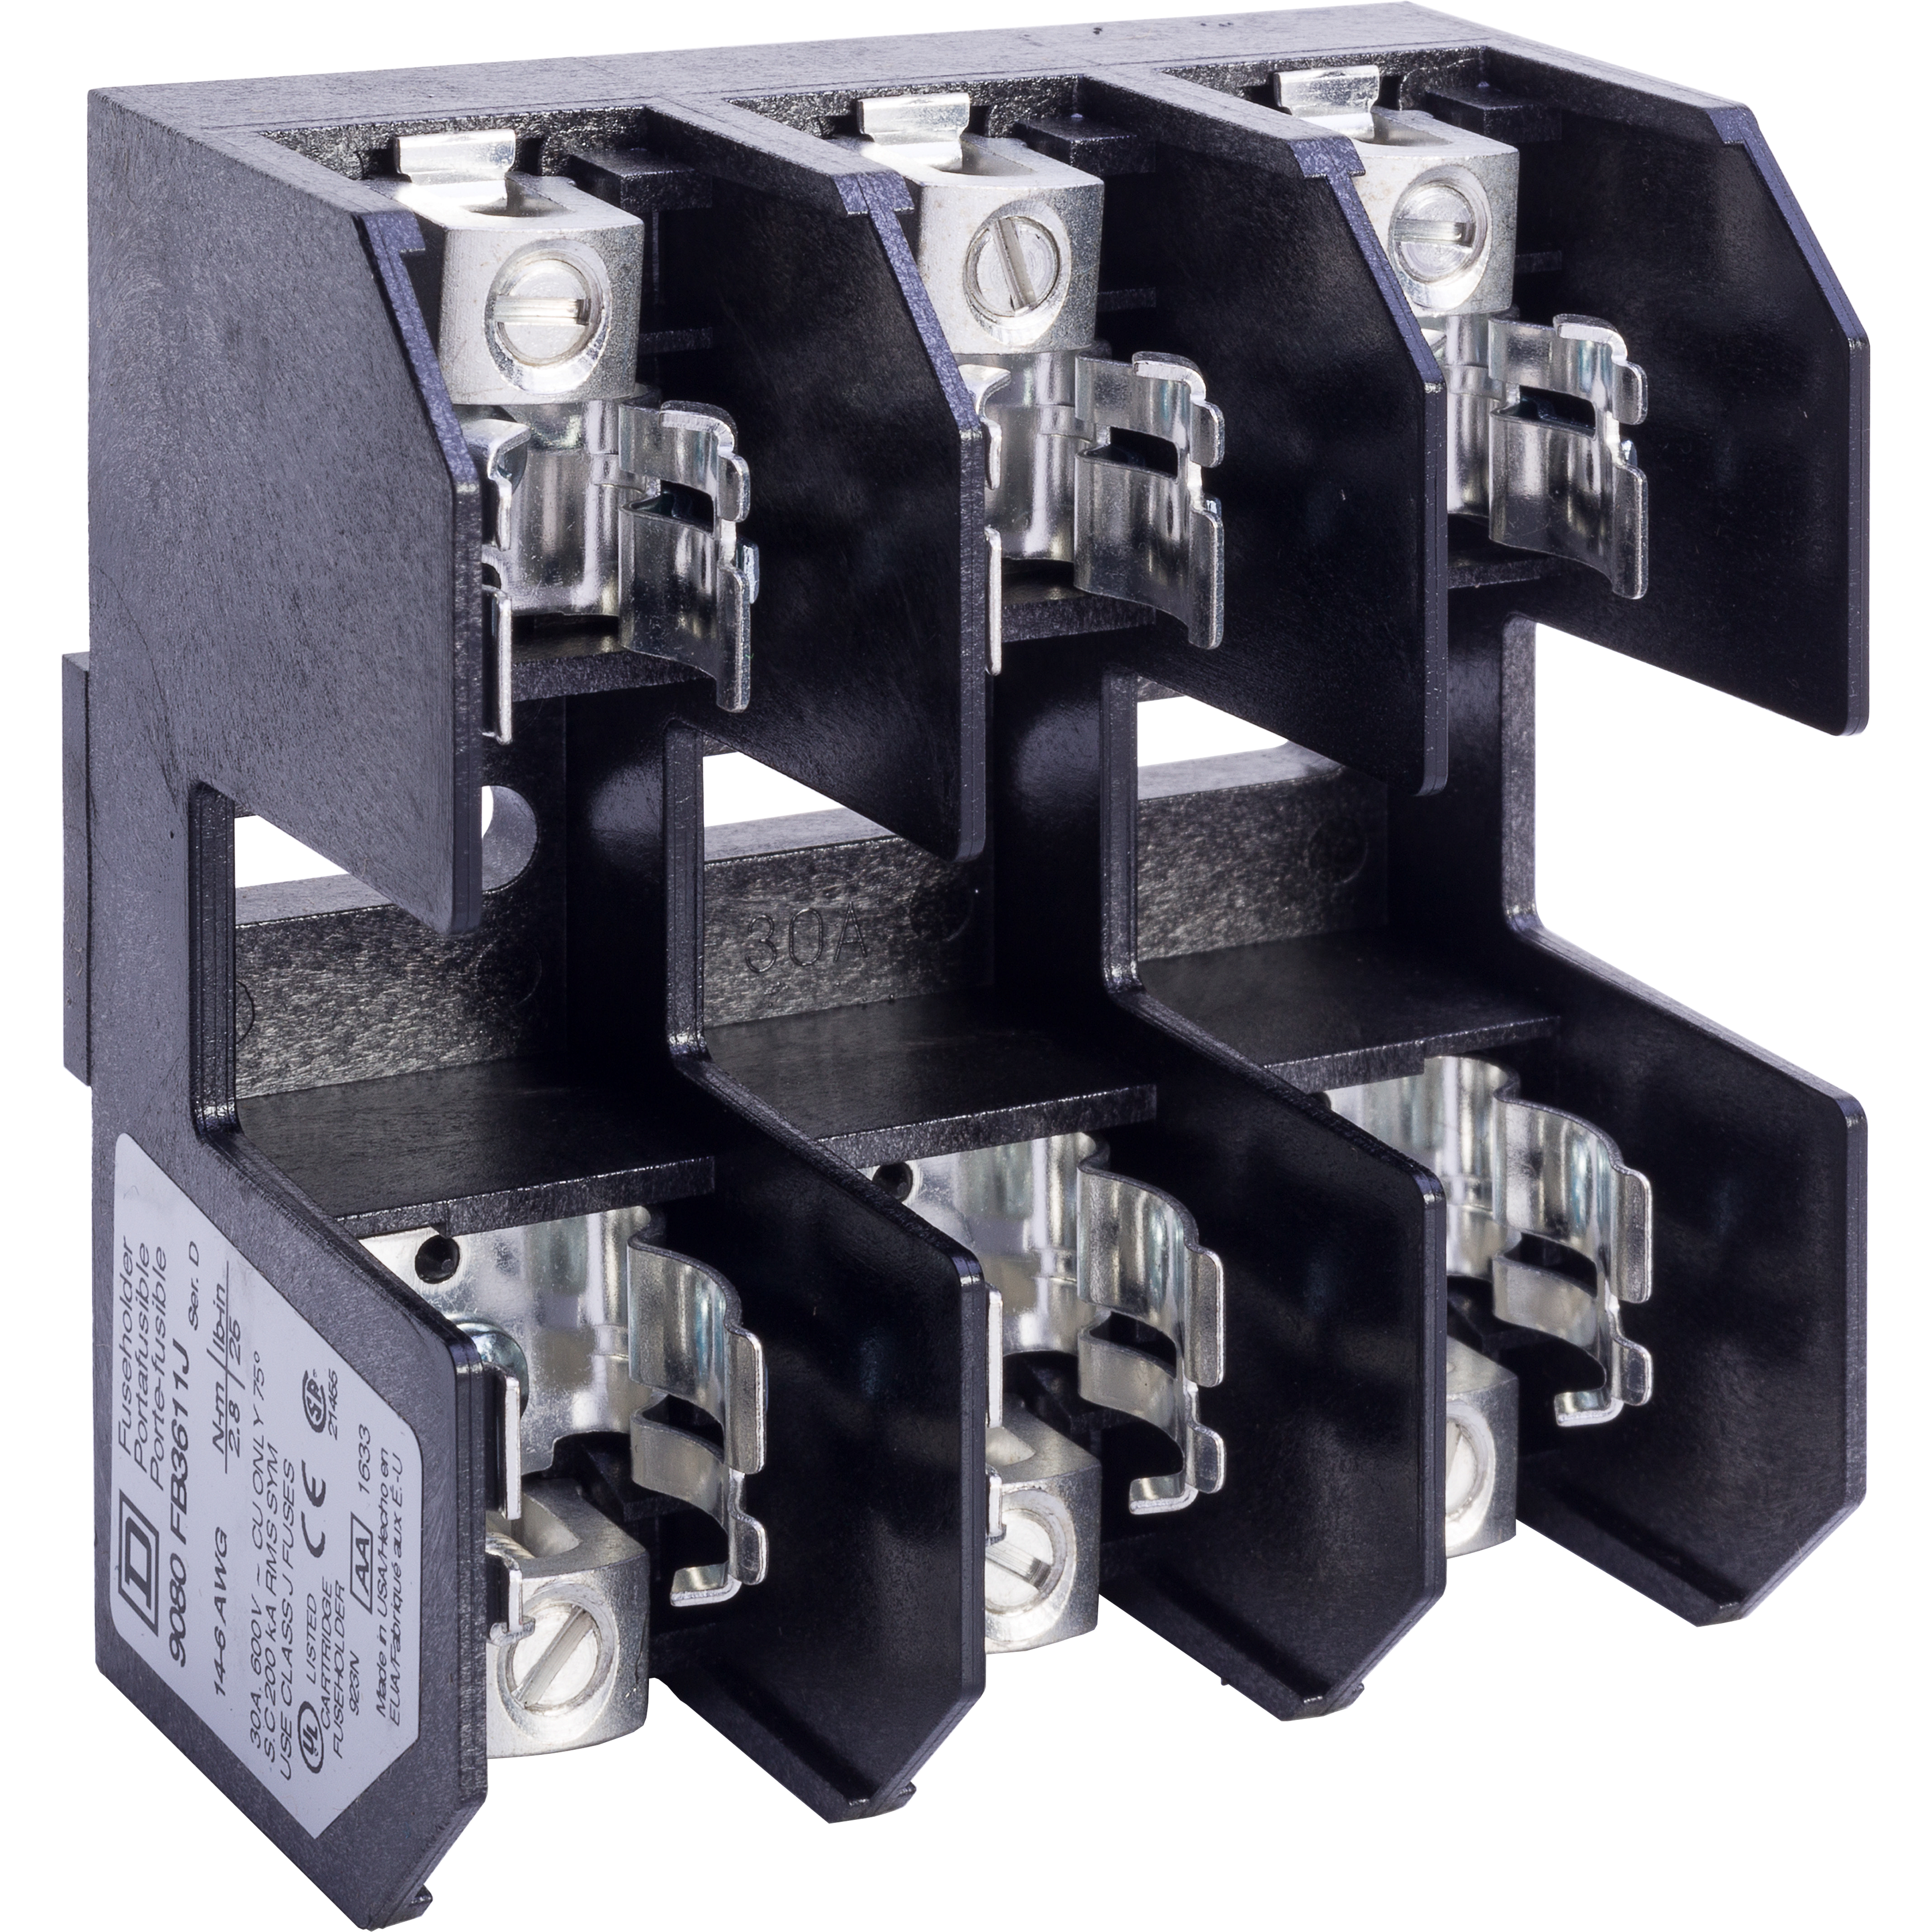 Fuse holder, Square D 9080FB, max 30A rated, 600VAC/DC, Class J type fuses, 3 pole, surface mount